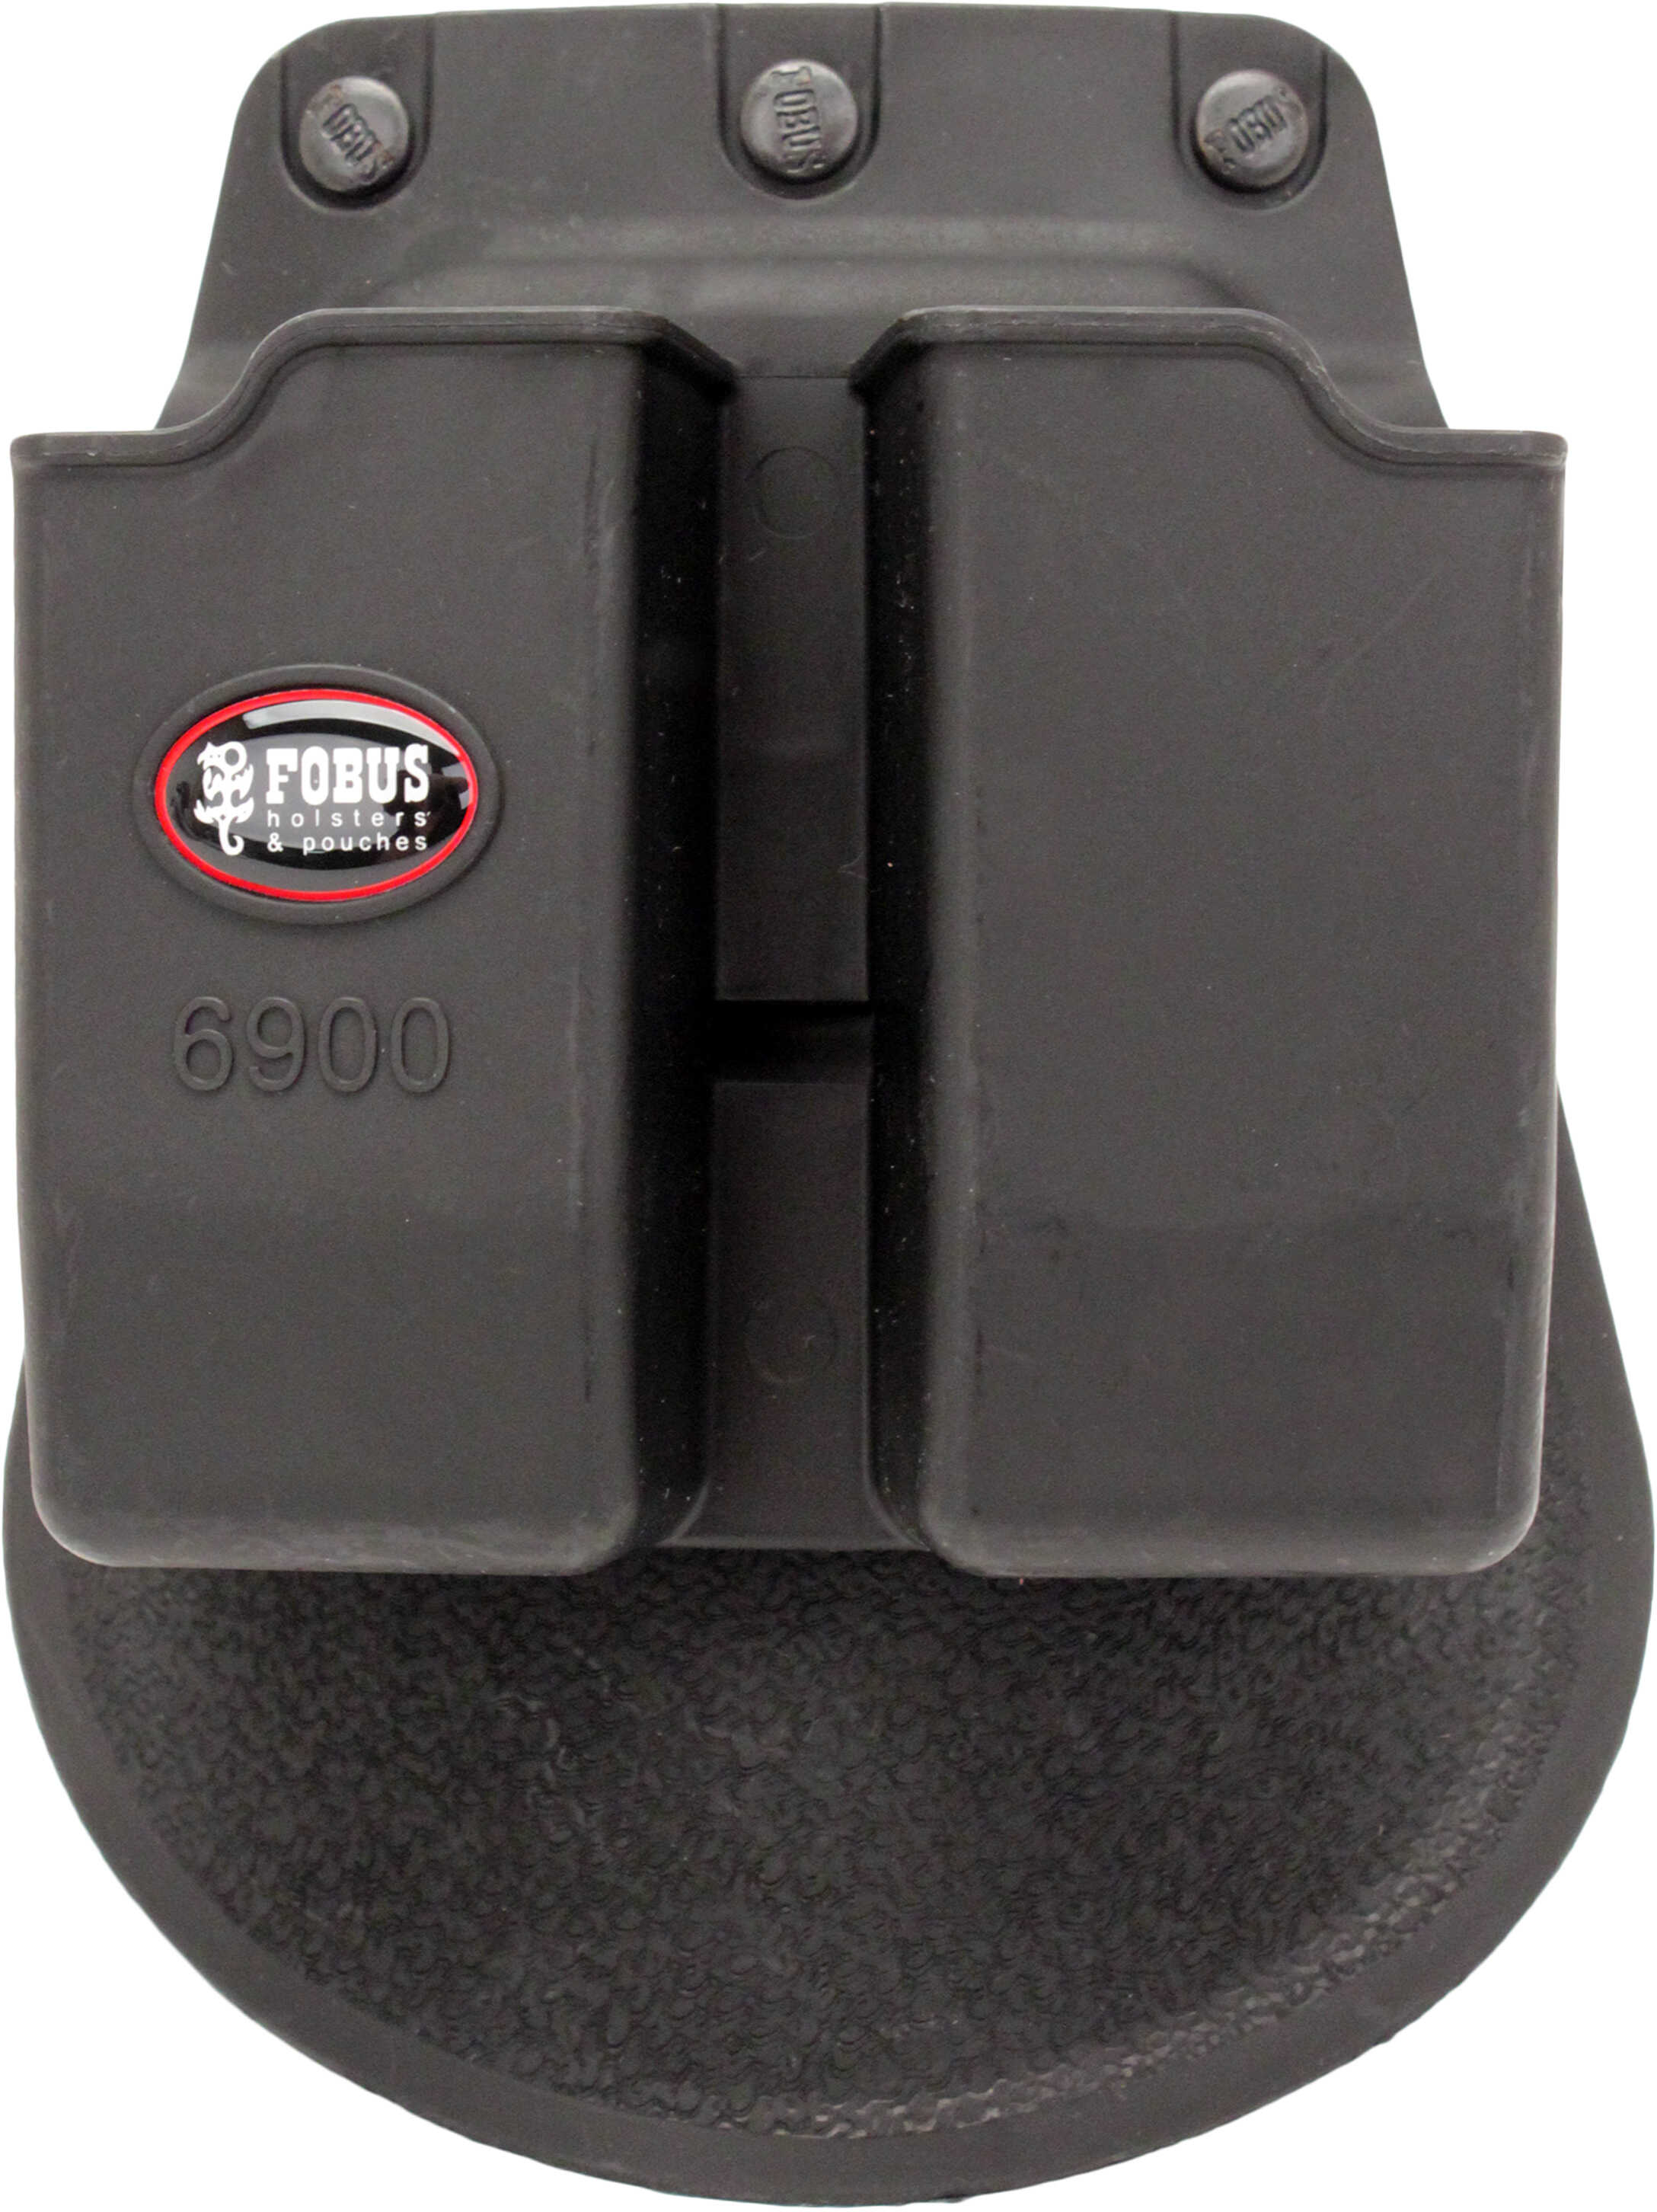 Fobus Dbl Magazine Pouch for Glock 9MM/40 HK